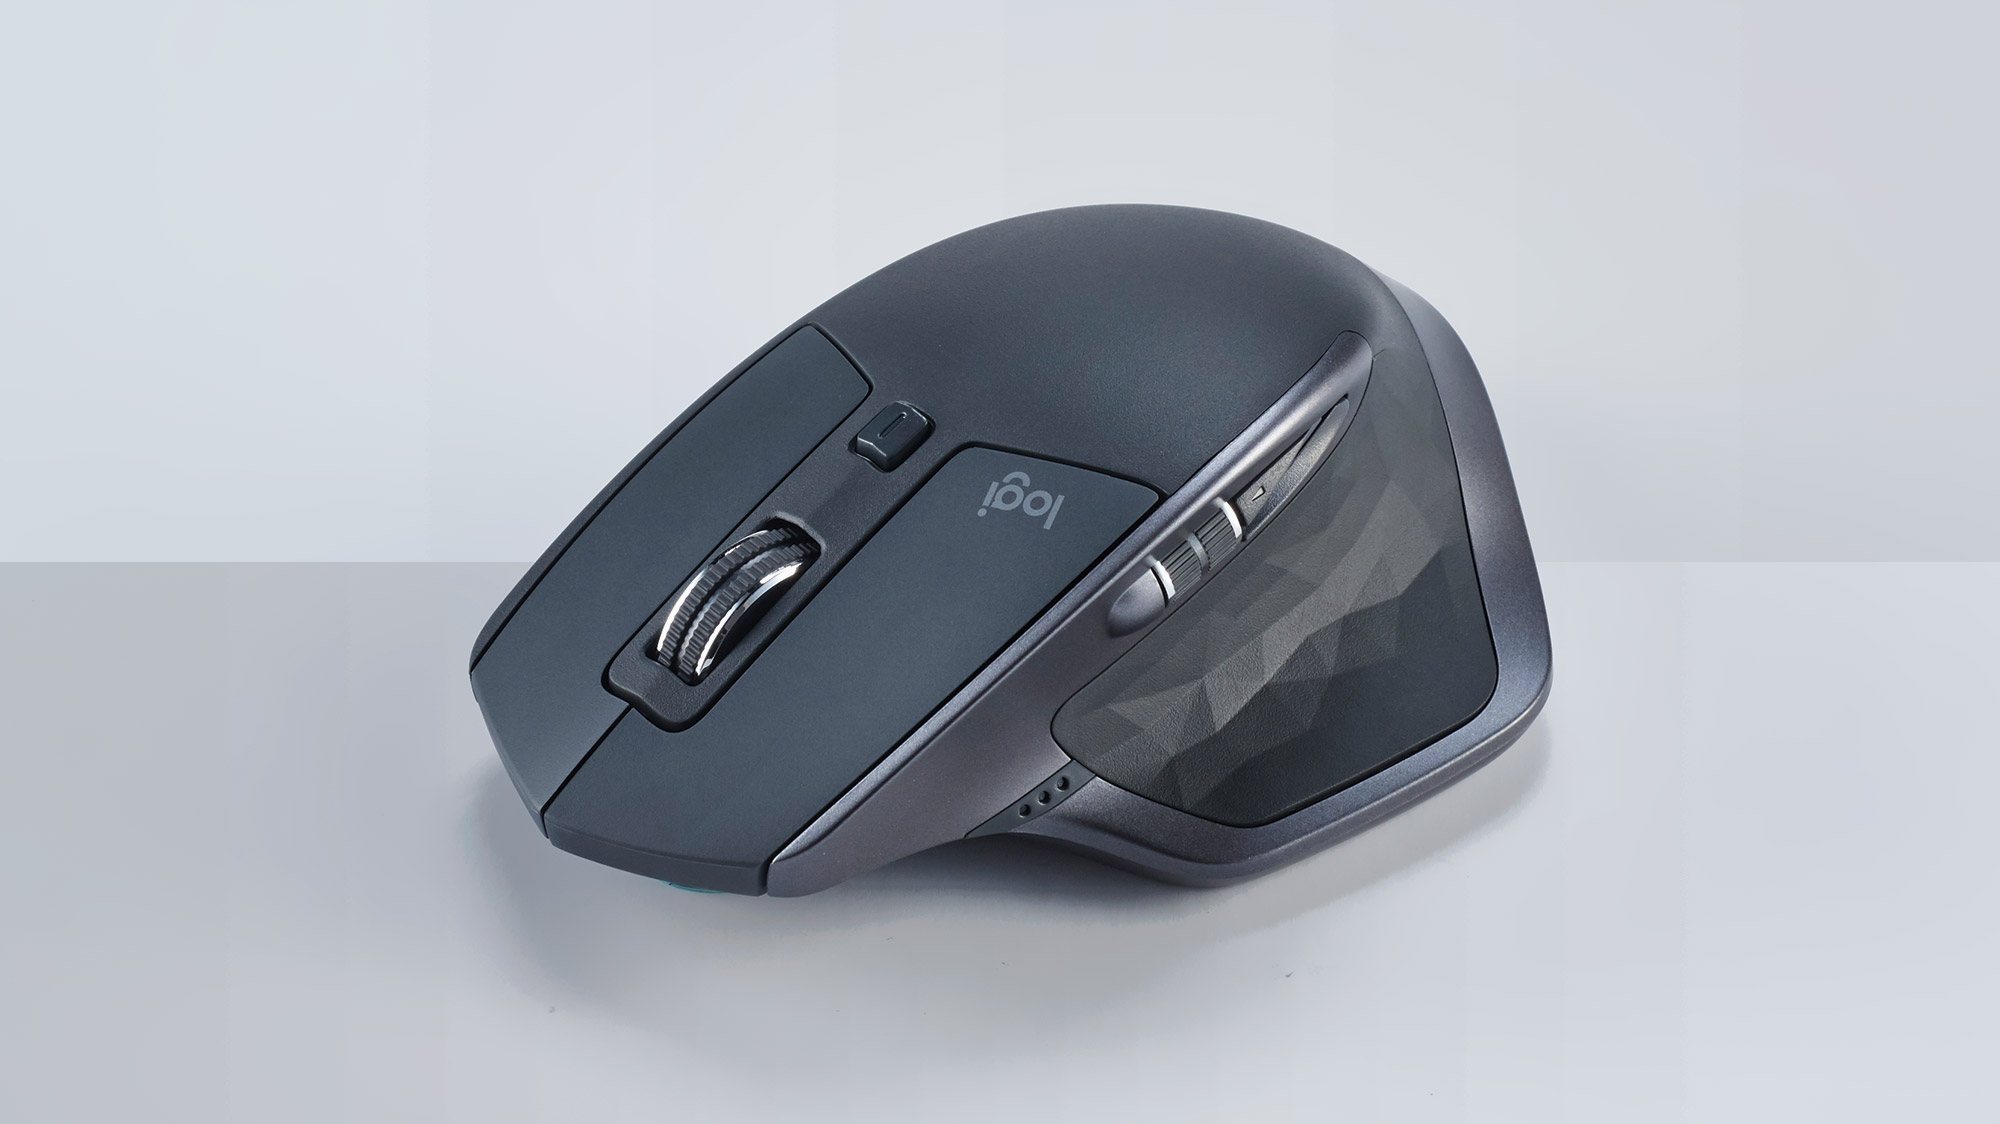 will the logitech keyboard and mouse bluetooh for mac work on windows?